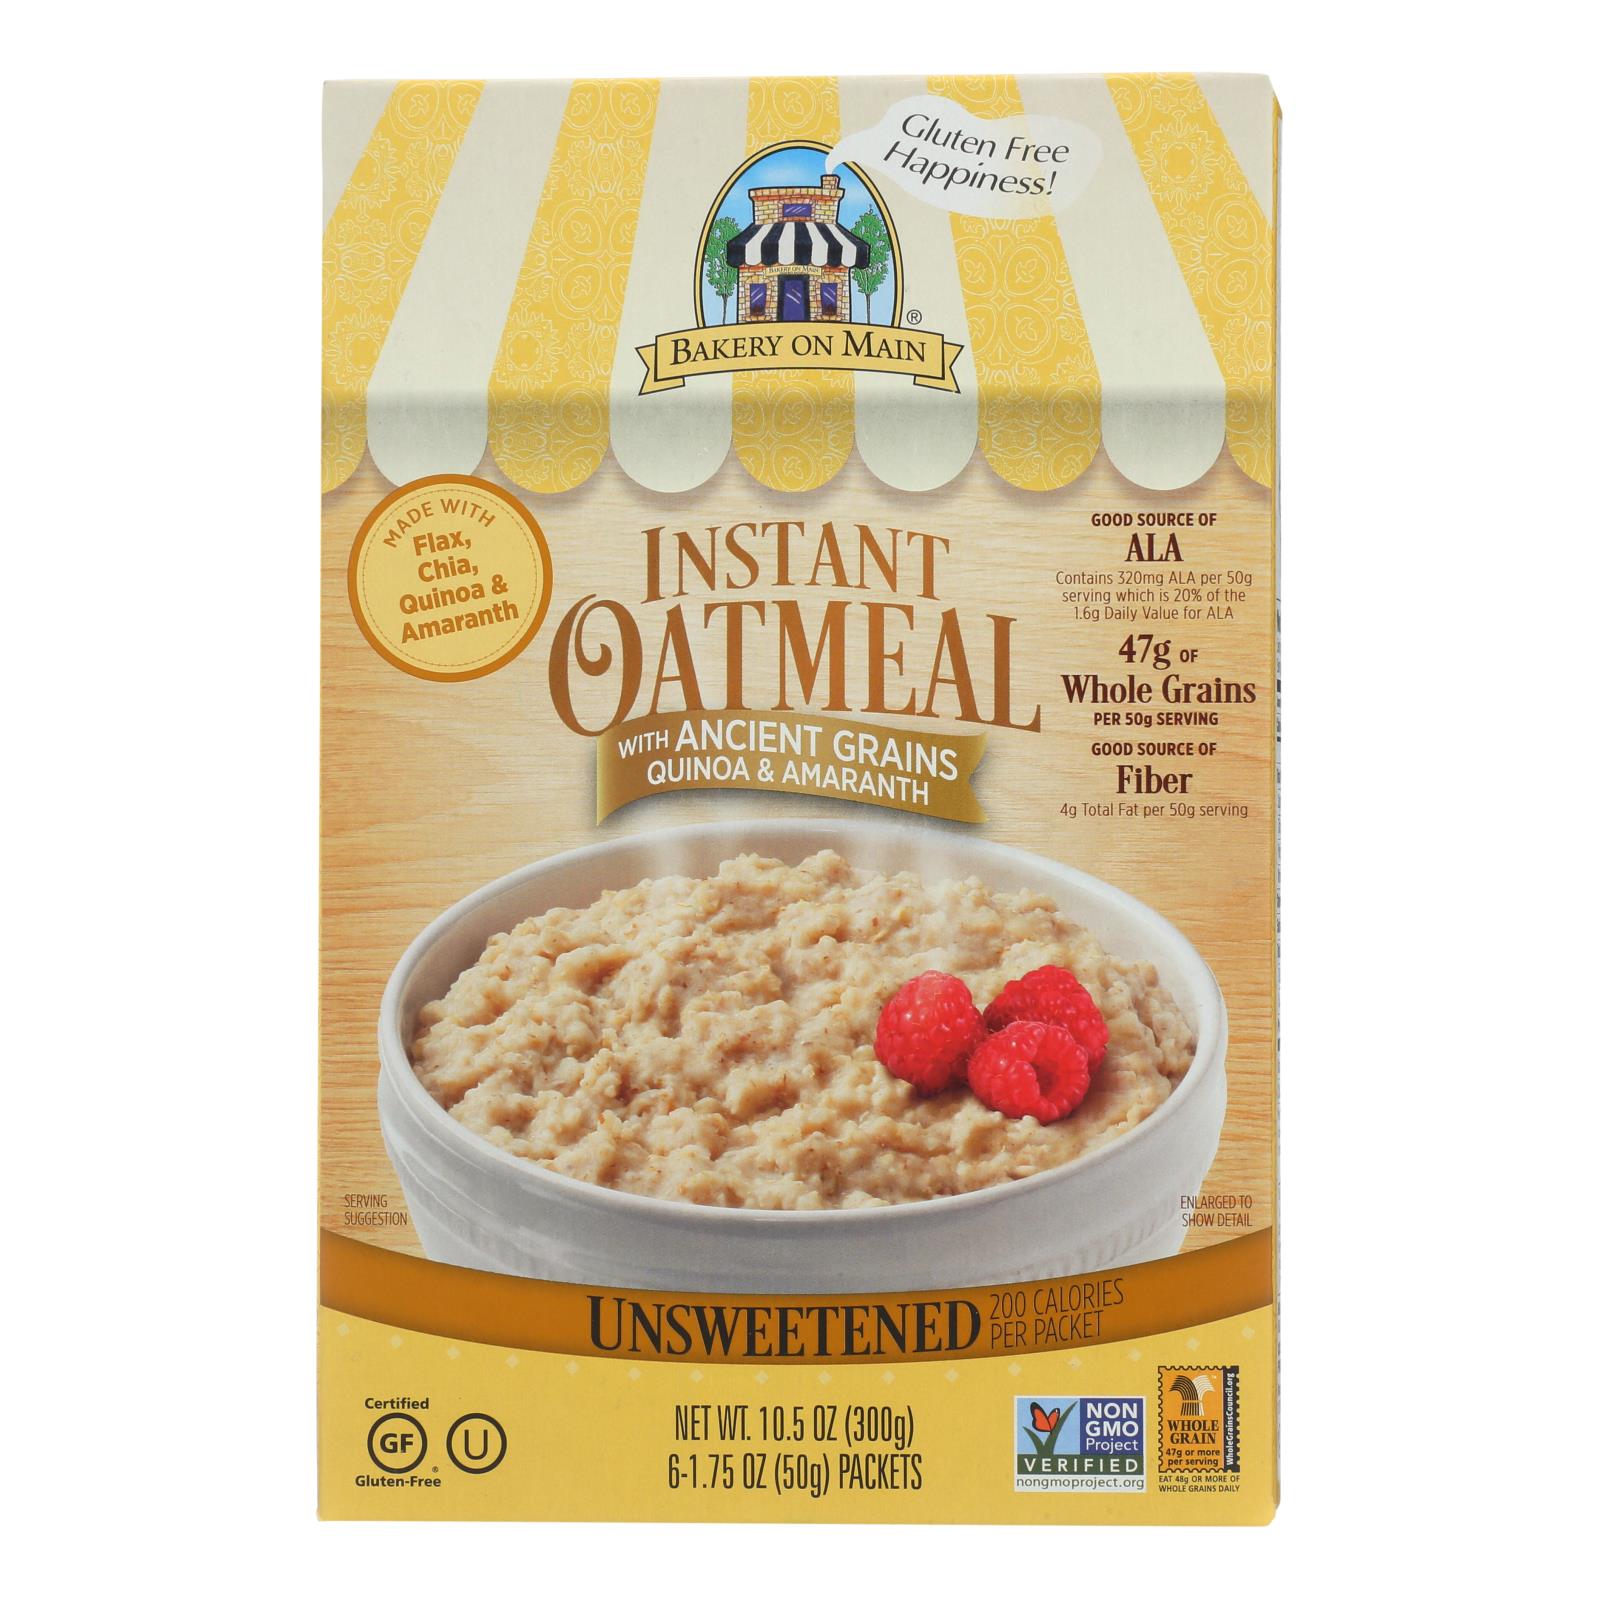 Bakery On Main, Bakery On Main Instant Oatmeal - Case of 6 - 10.5 oz. (Pack of 6)